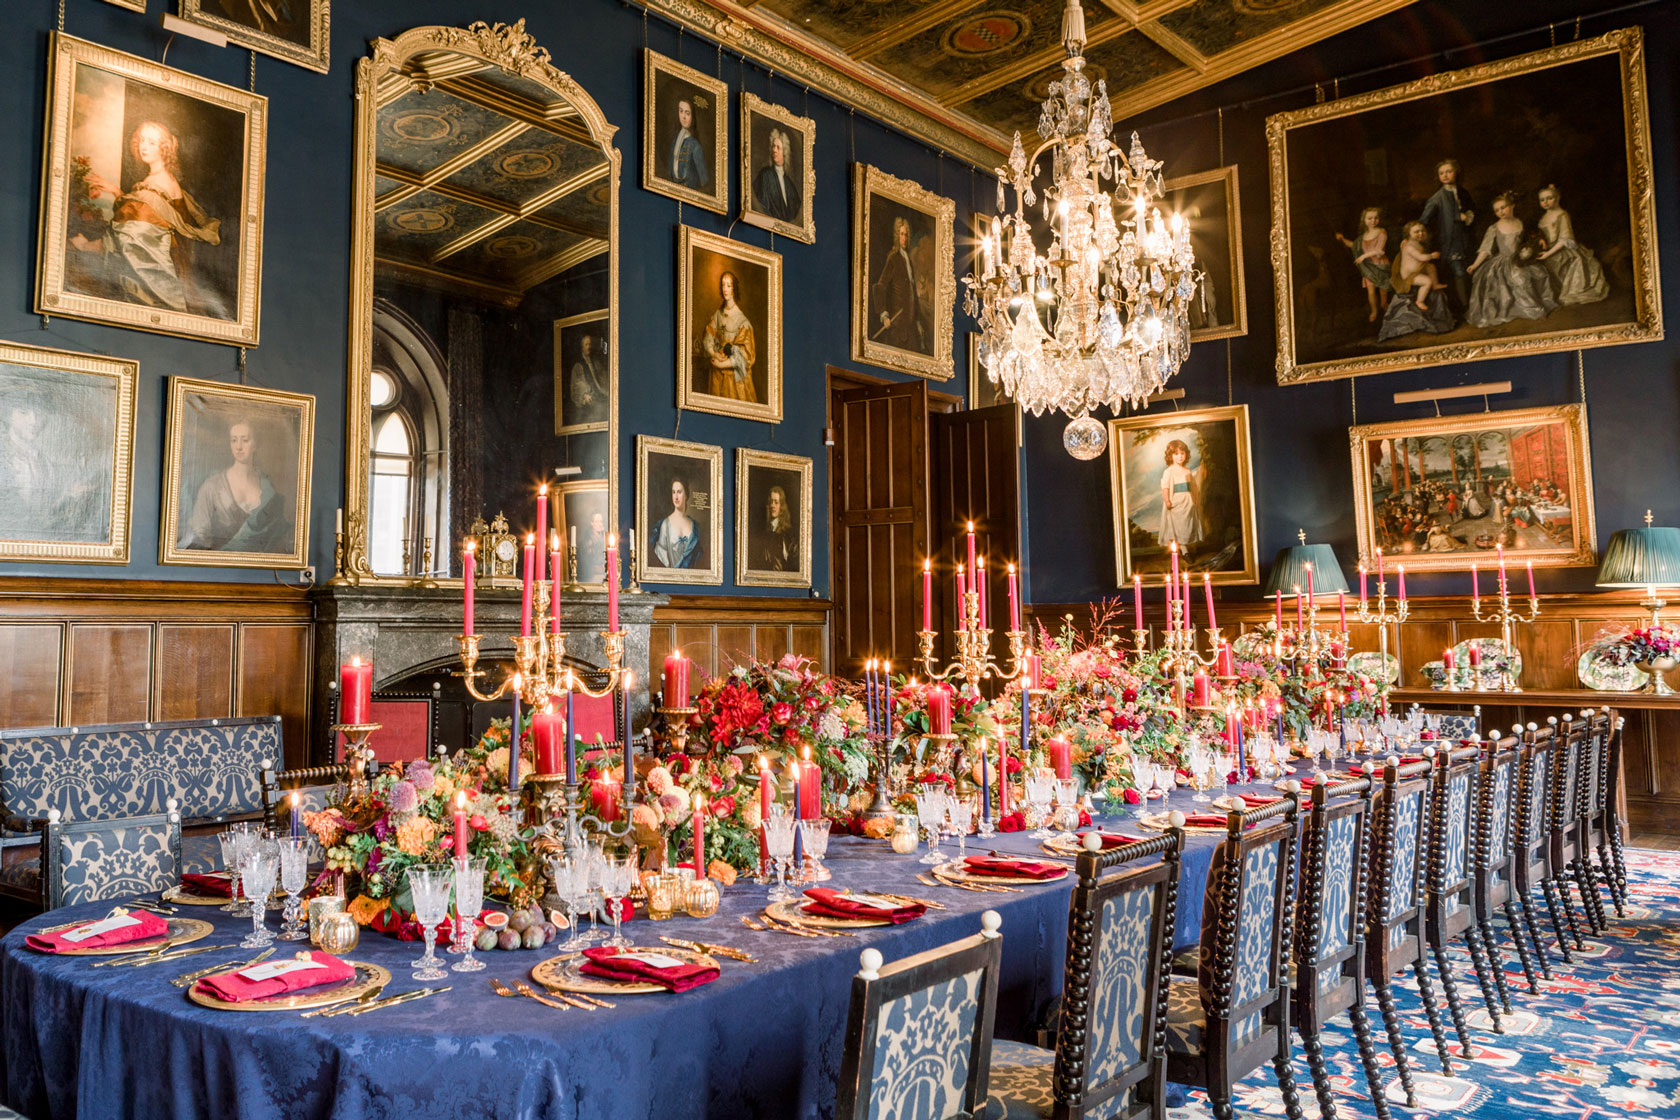 navy and gold regal inspired castle wedding breakfast banquet with hundreds of candles, gold chalices of flowers inside a castle